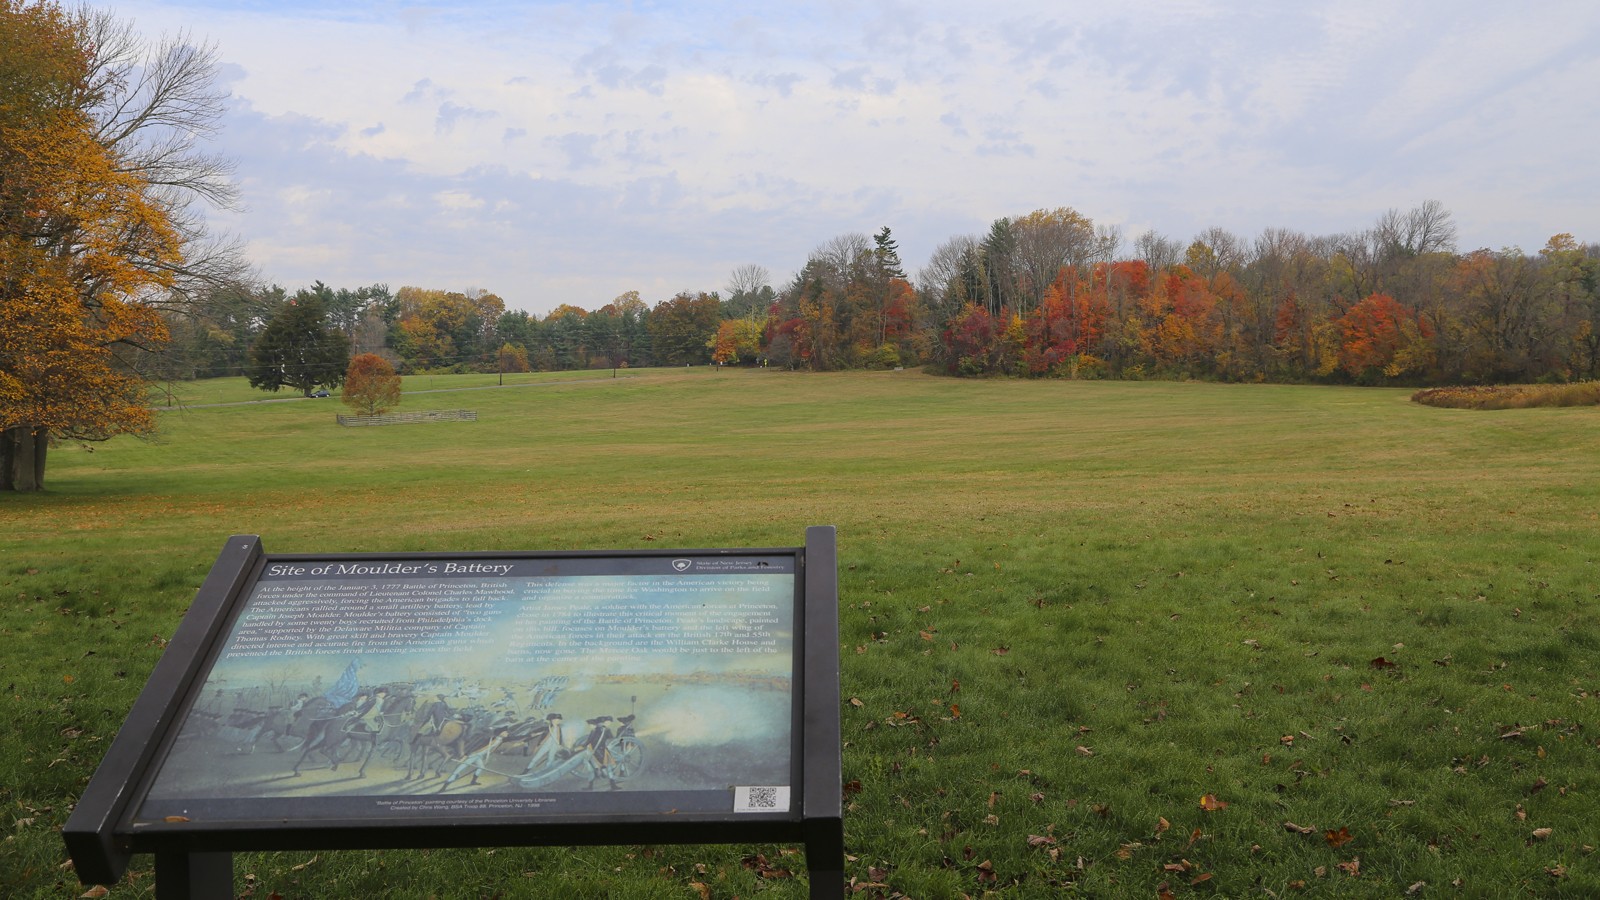 Princeton Battlefield State Park, located immediately adjacent to Maxwell’s Field